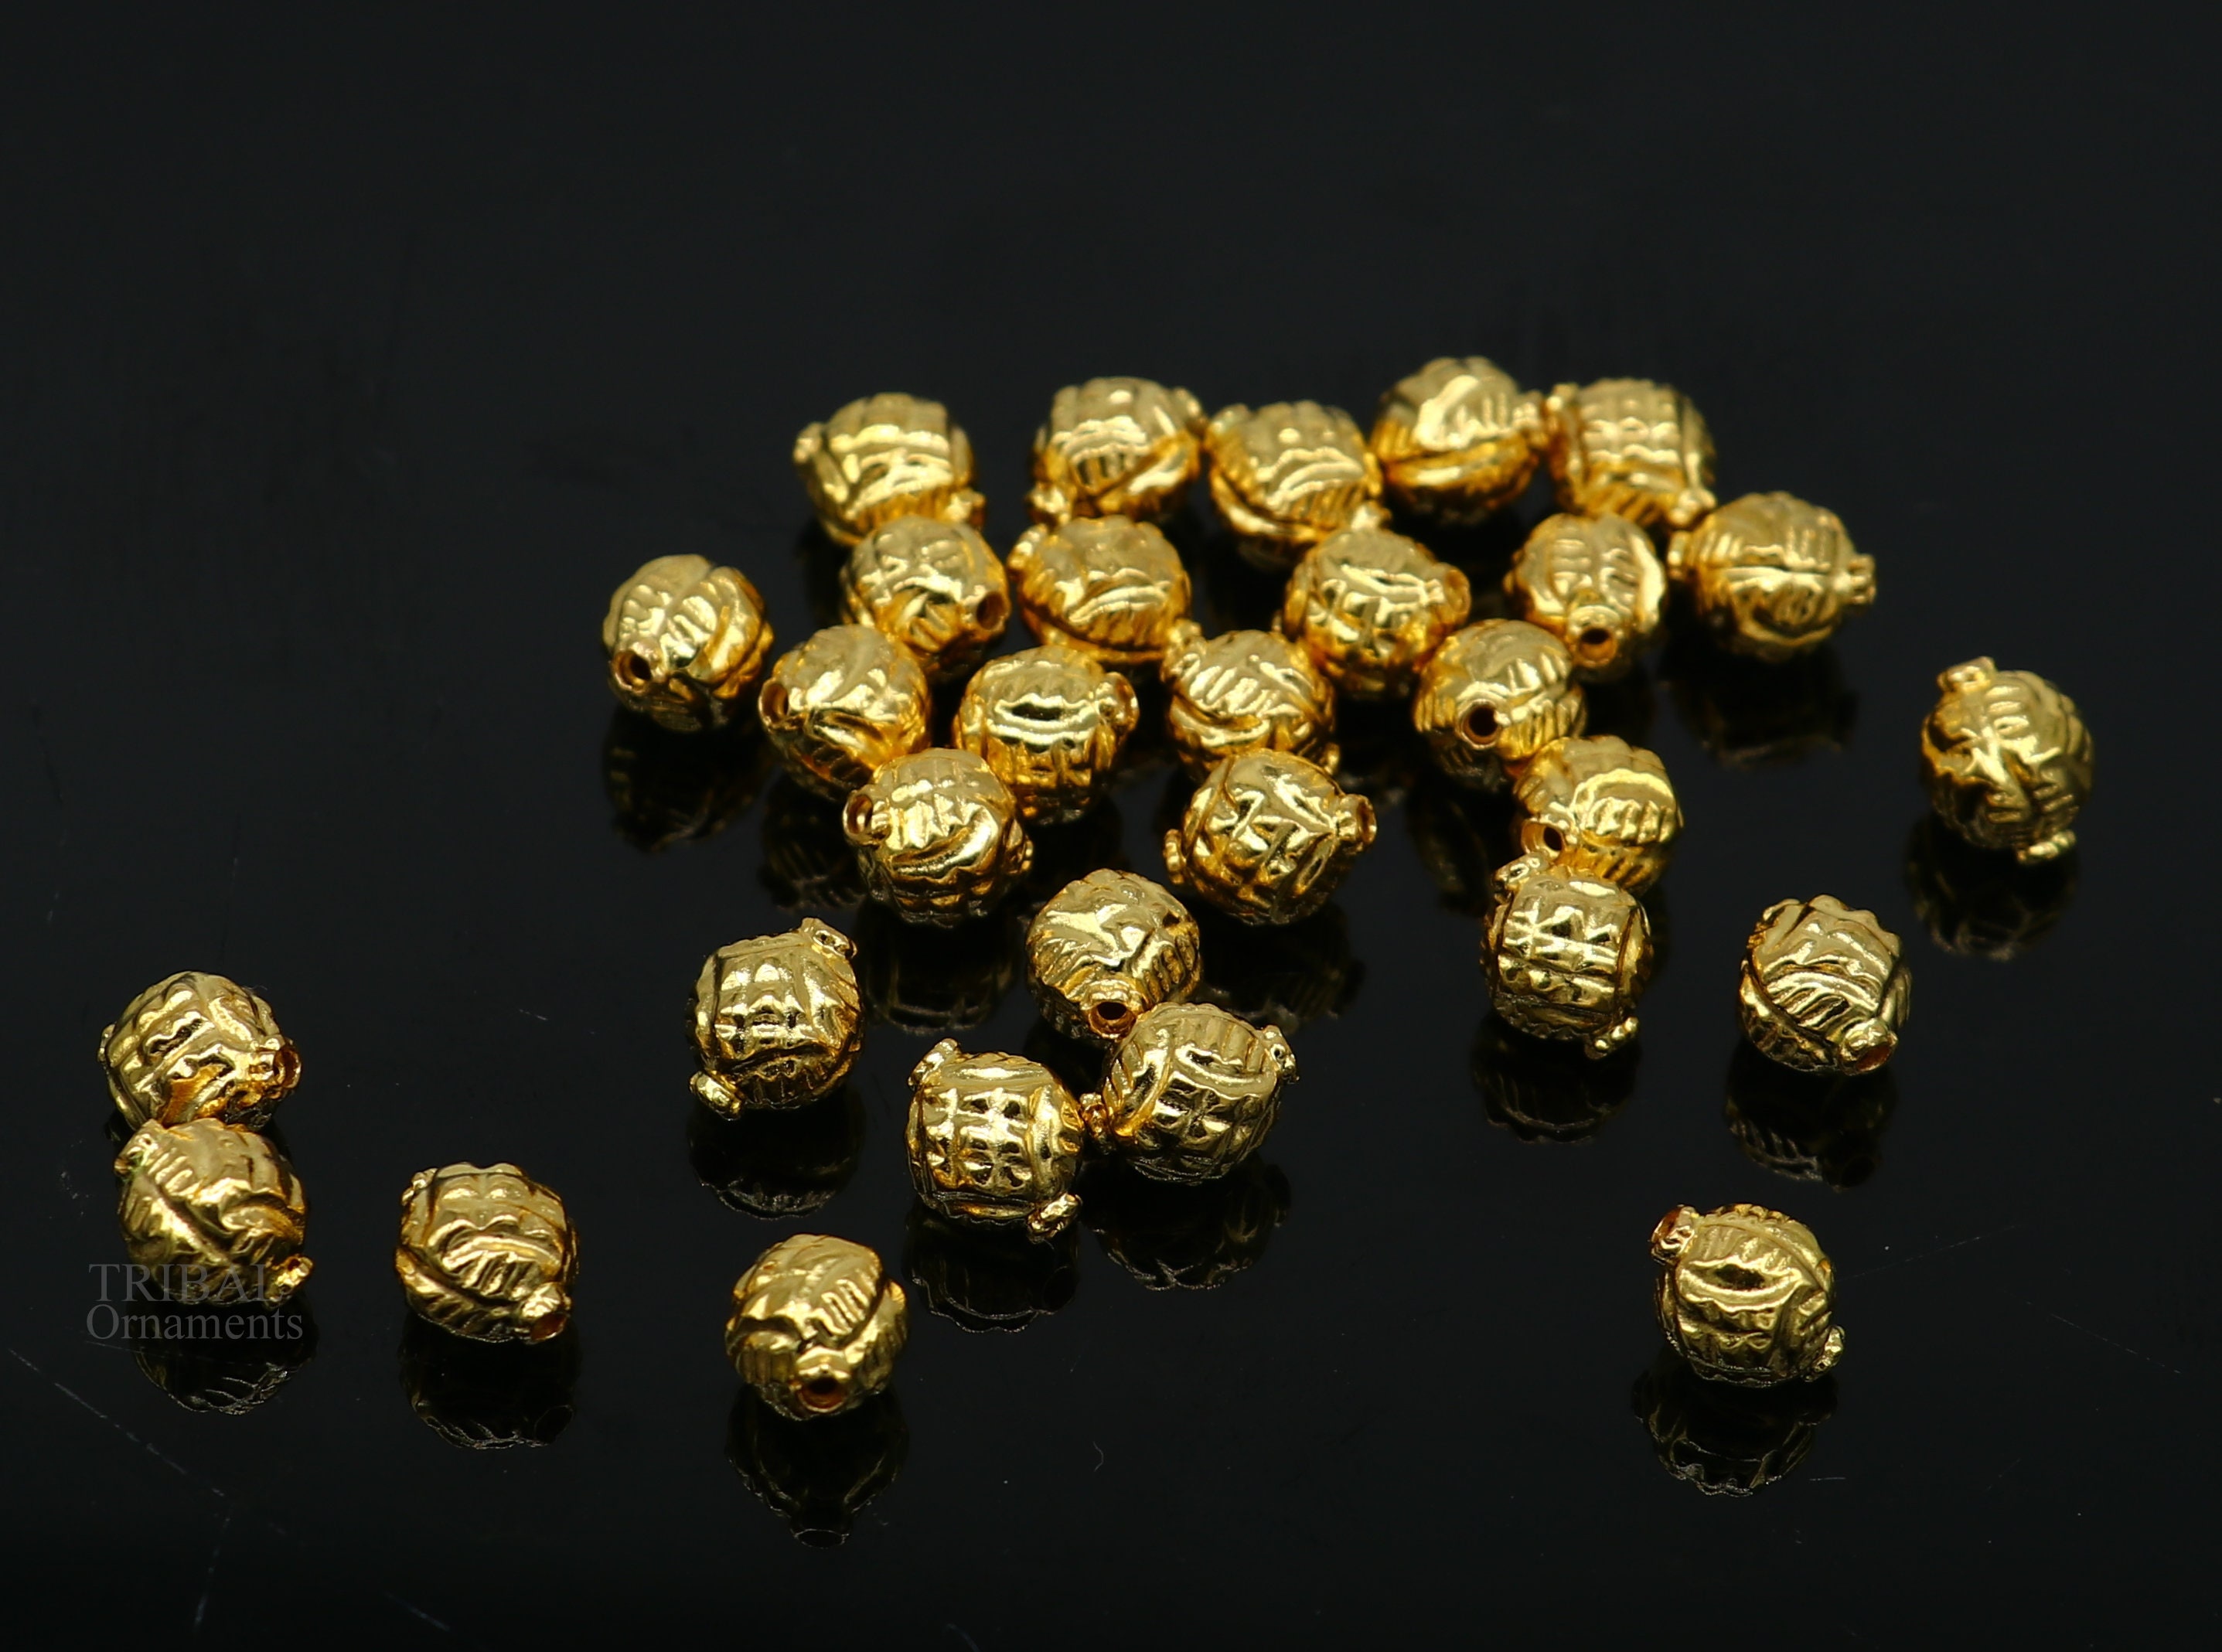 Vintage Antique Handmade Loose Beads Traditional Designer 22k Yellow Gold  Beads or Ball for Custom Jewelry Making Bead21 -  Denmark